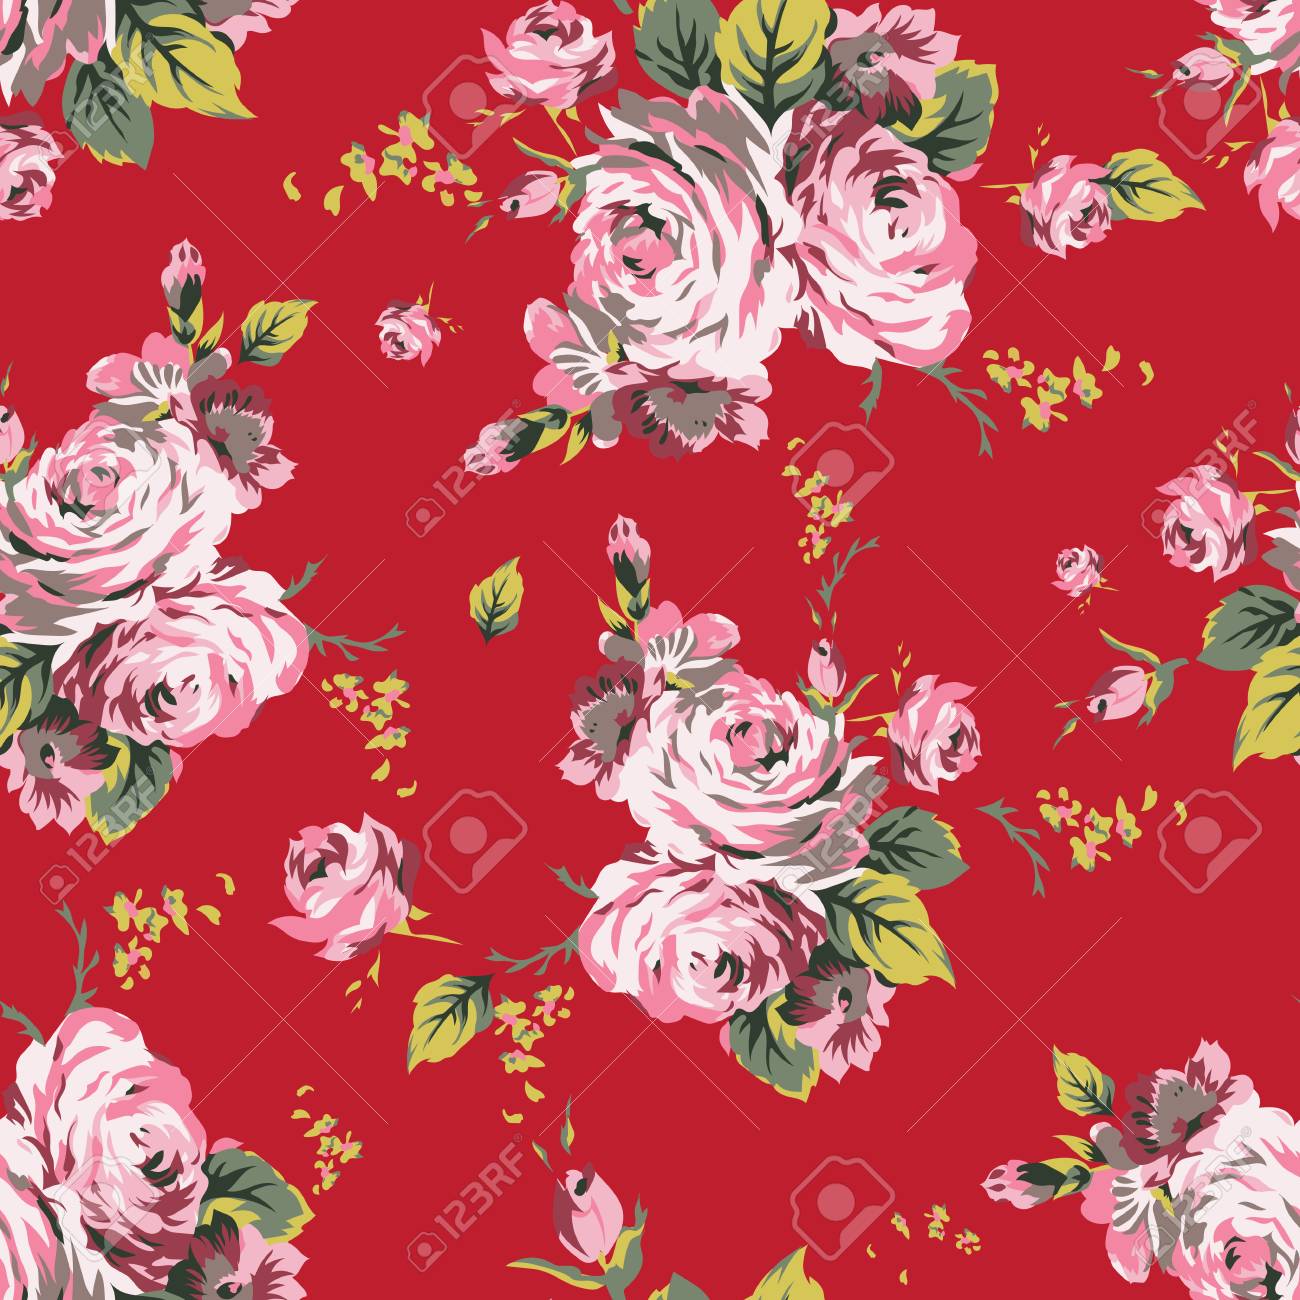 Shabby Chic Vintage Roses Seamless Pattern Classic Chintz Floral